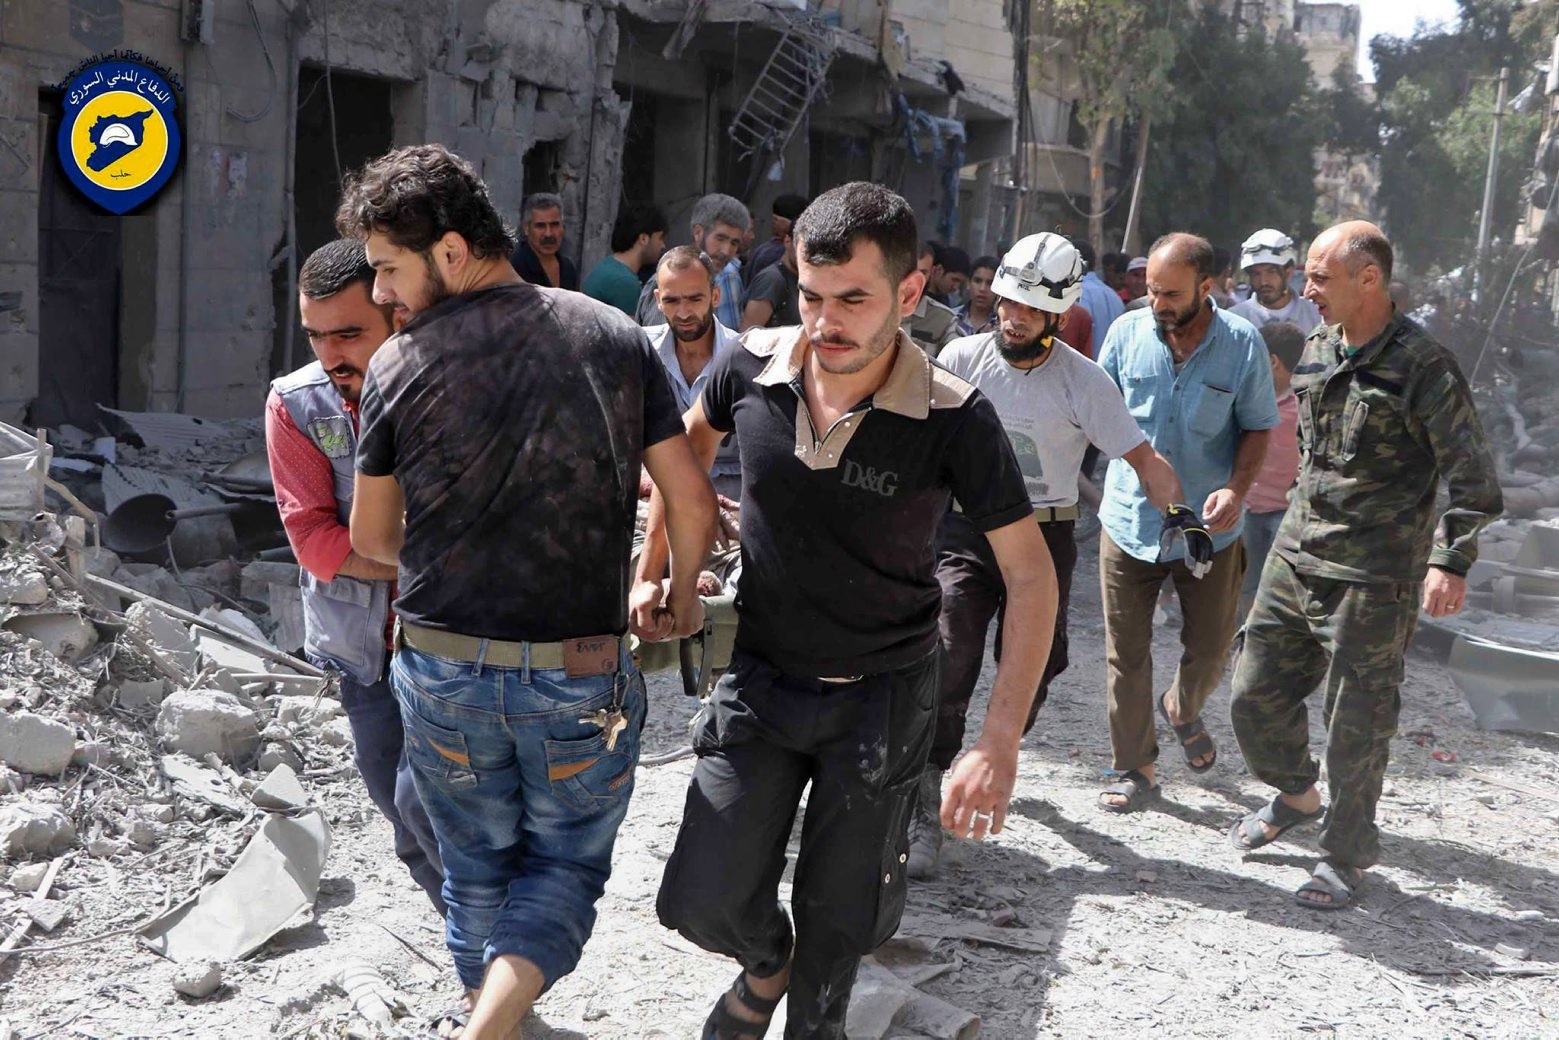 In this photo provided by the Syrian Civil Defense White Helmets, rescue workers work the site of airstrikes in al-Mashhad neighborhood in the rebel-held part of eastern Aleppo, Syria, Wednesday Sept. 21, 2016. Ibrahim Alhaj, a member of the volunteer first responders known as the Syria Civil Defense, said 24 people were killed in a series of bombings in several parts of the besieged city Aleppo on Wednesday. (Syrian Civil Defense White Helmets via AP) Mideast Syria